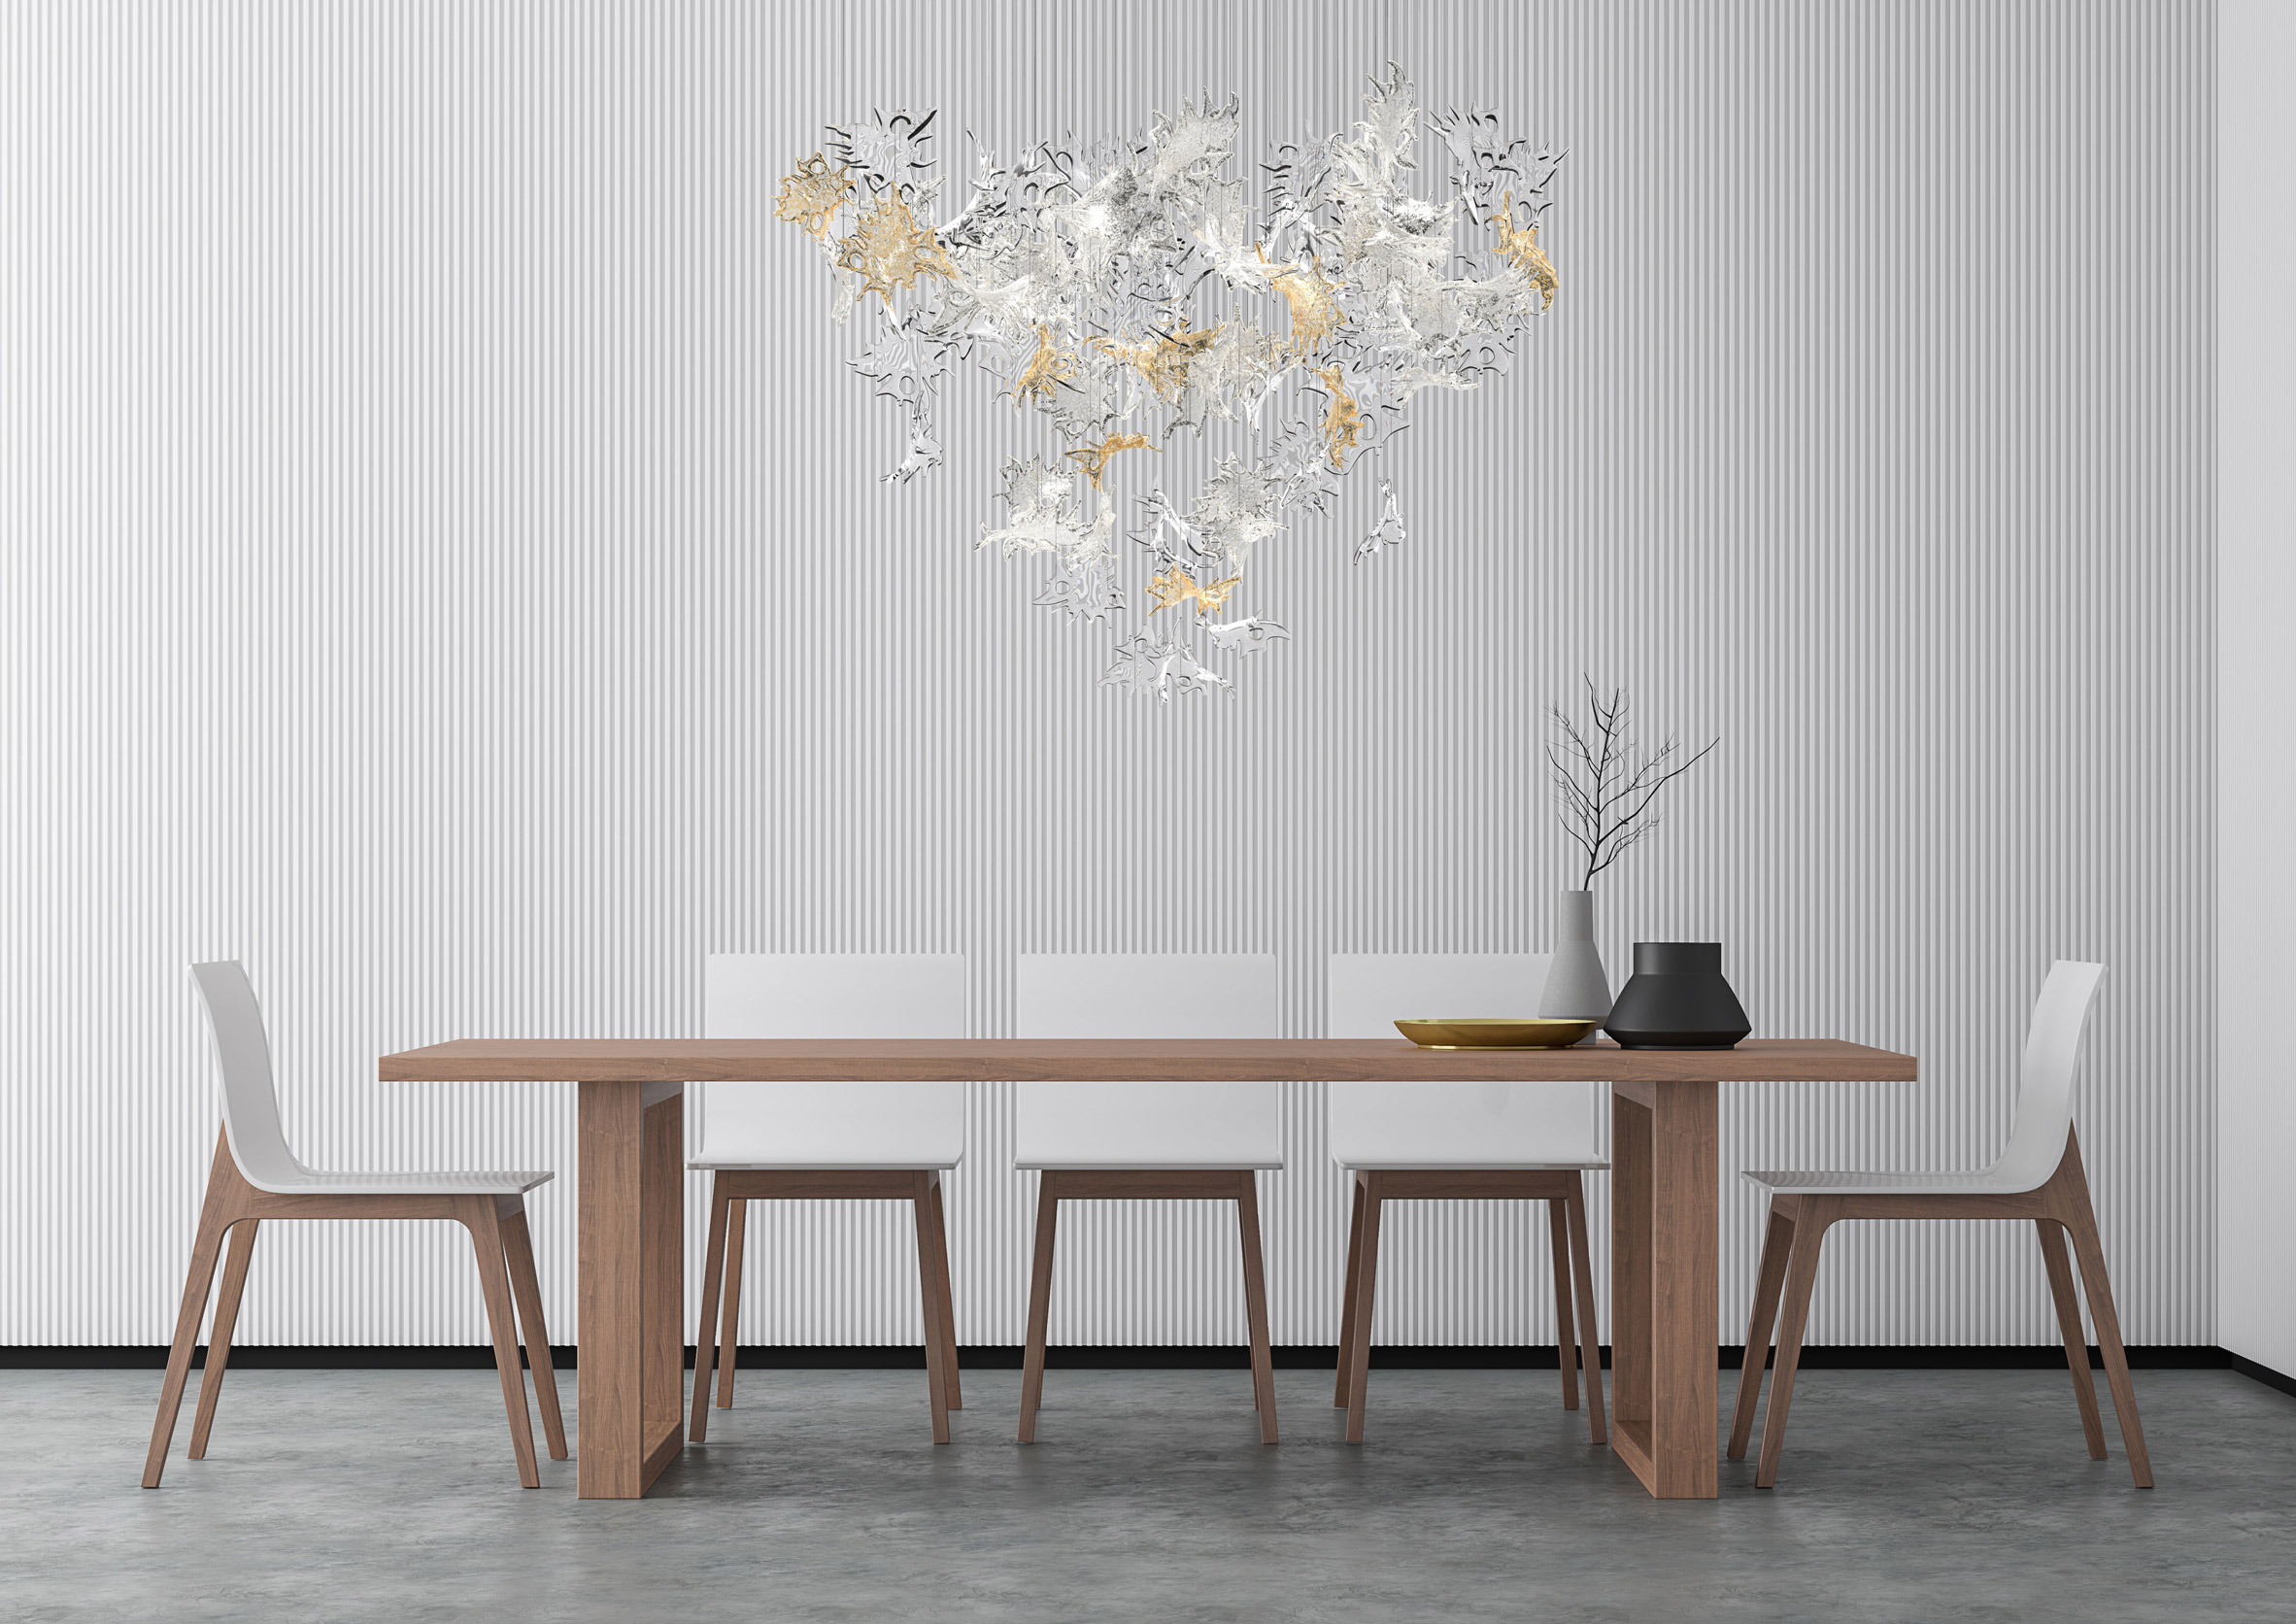 Lasvit's Dancing Leaves glass lighting sculpture in light amber and clear suspended above a dining table